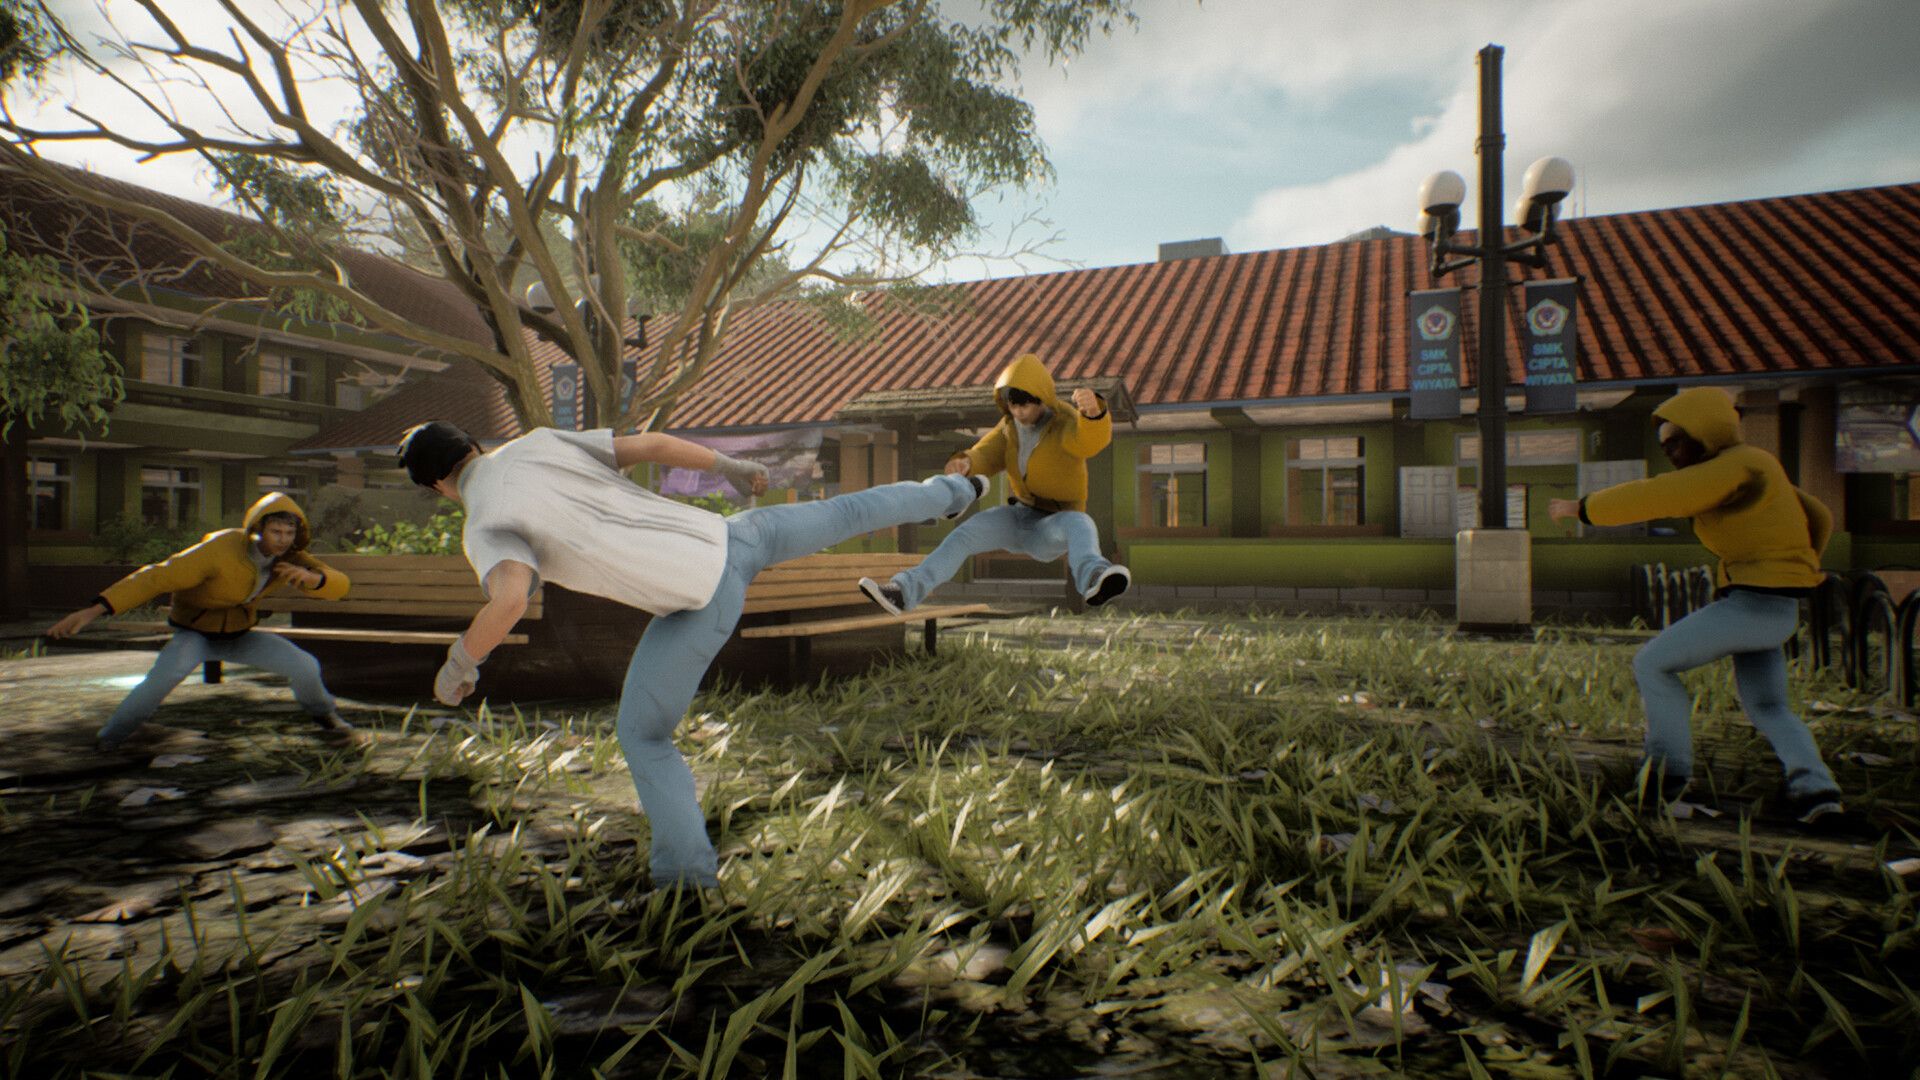 Screenshot of the game. Budi fights off three yellow-hoodie-wearing assailants in the schoolyard.